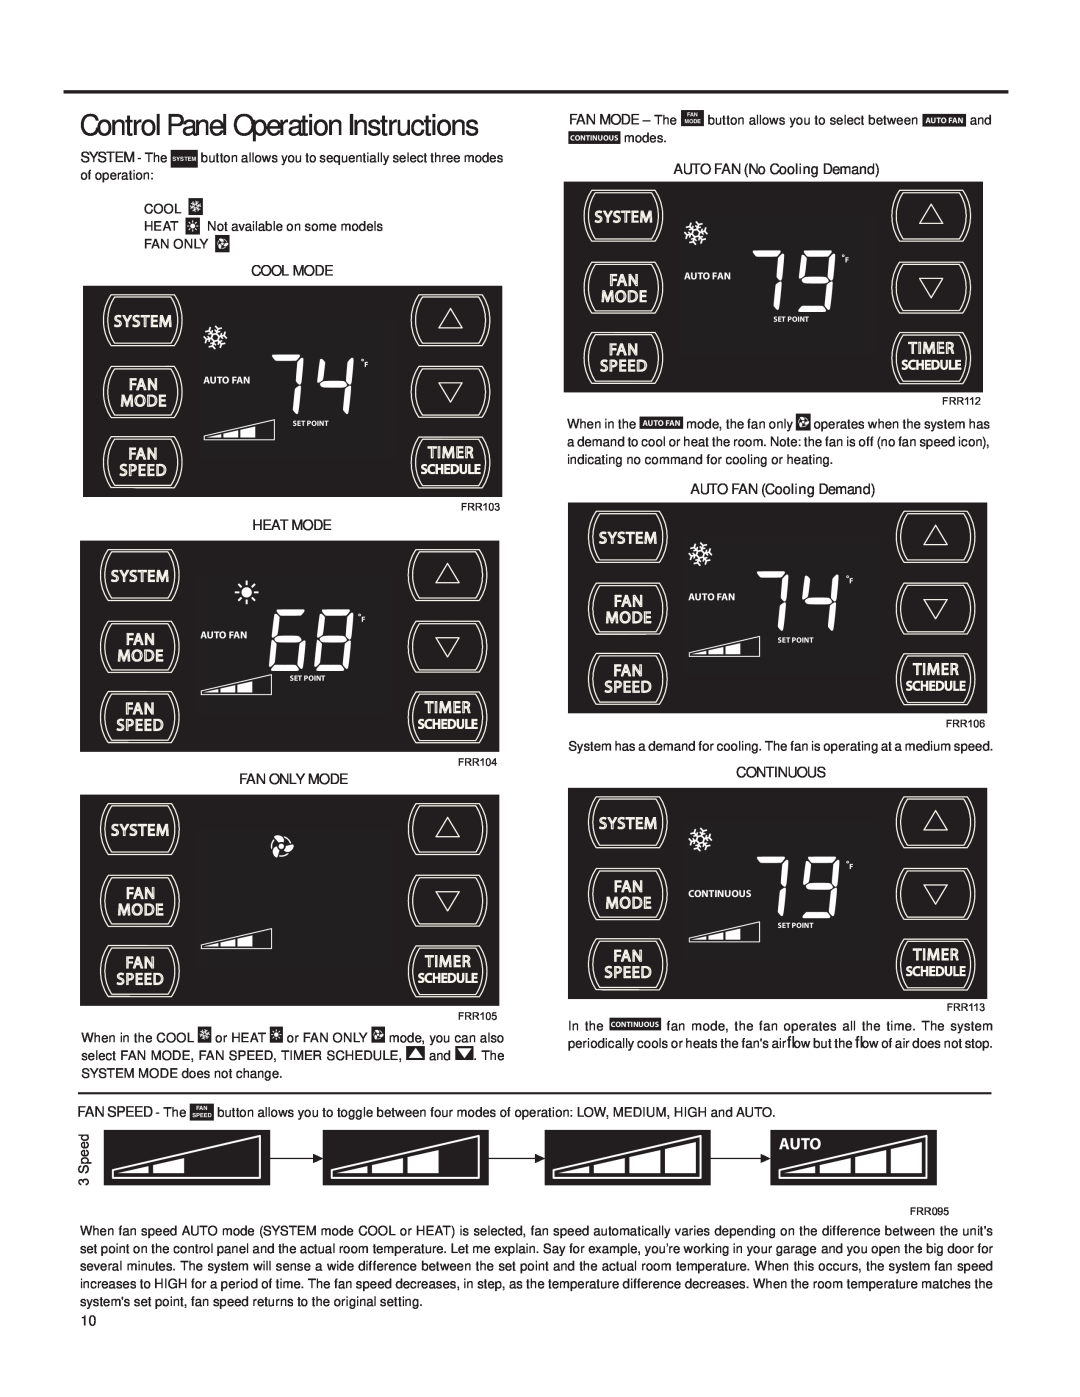 Friedrich SQ05, SQ10 Control Panel Operation Instructions, Cool Mode, Heat Mode, Fan Only Mode, FAN MODE – The, Continuous 